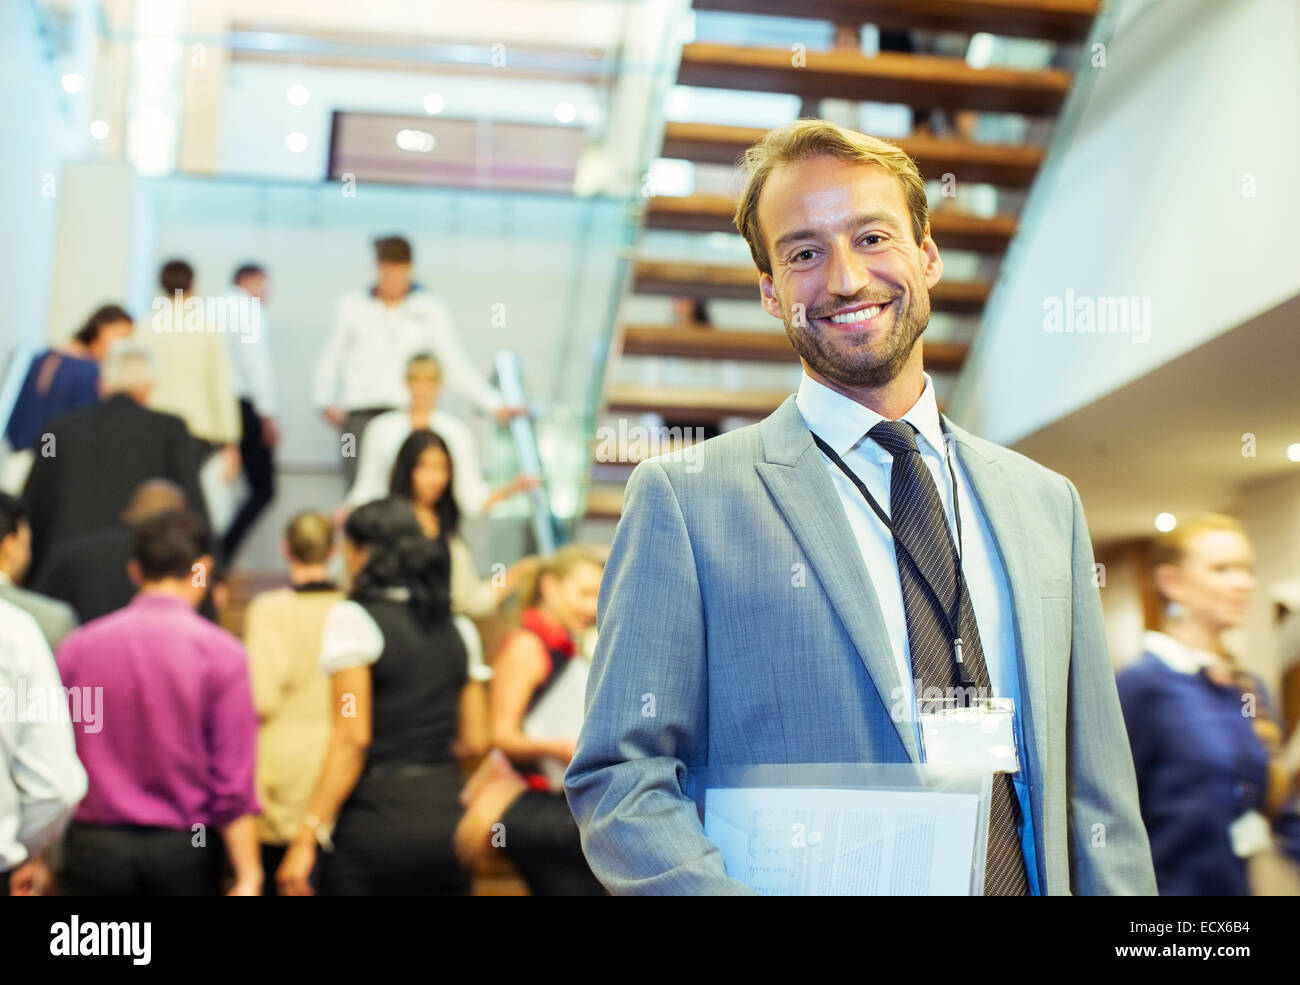 Portrait of smiling businessman holding file, standing in crowded lobby of conference center Stock Photo